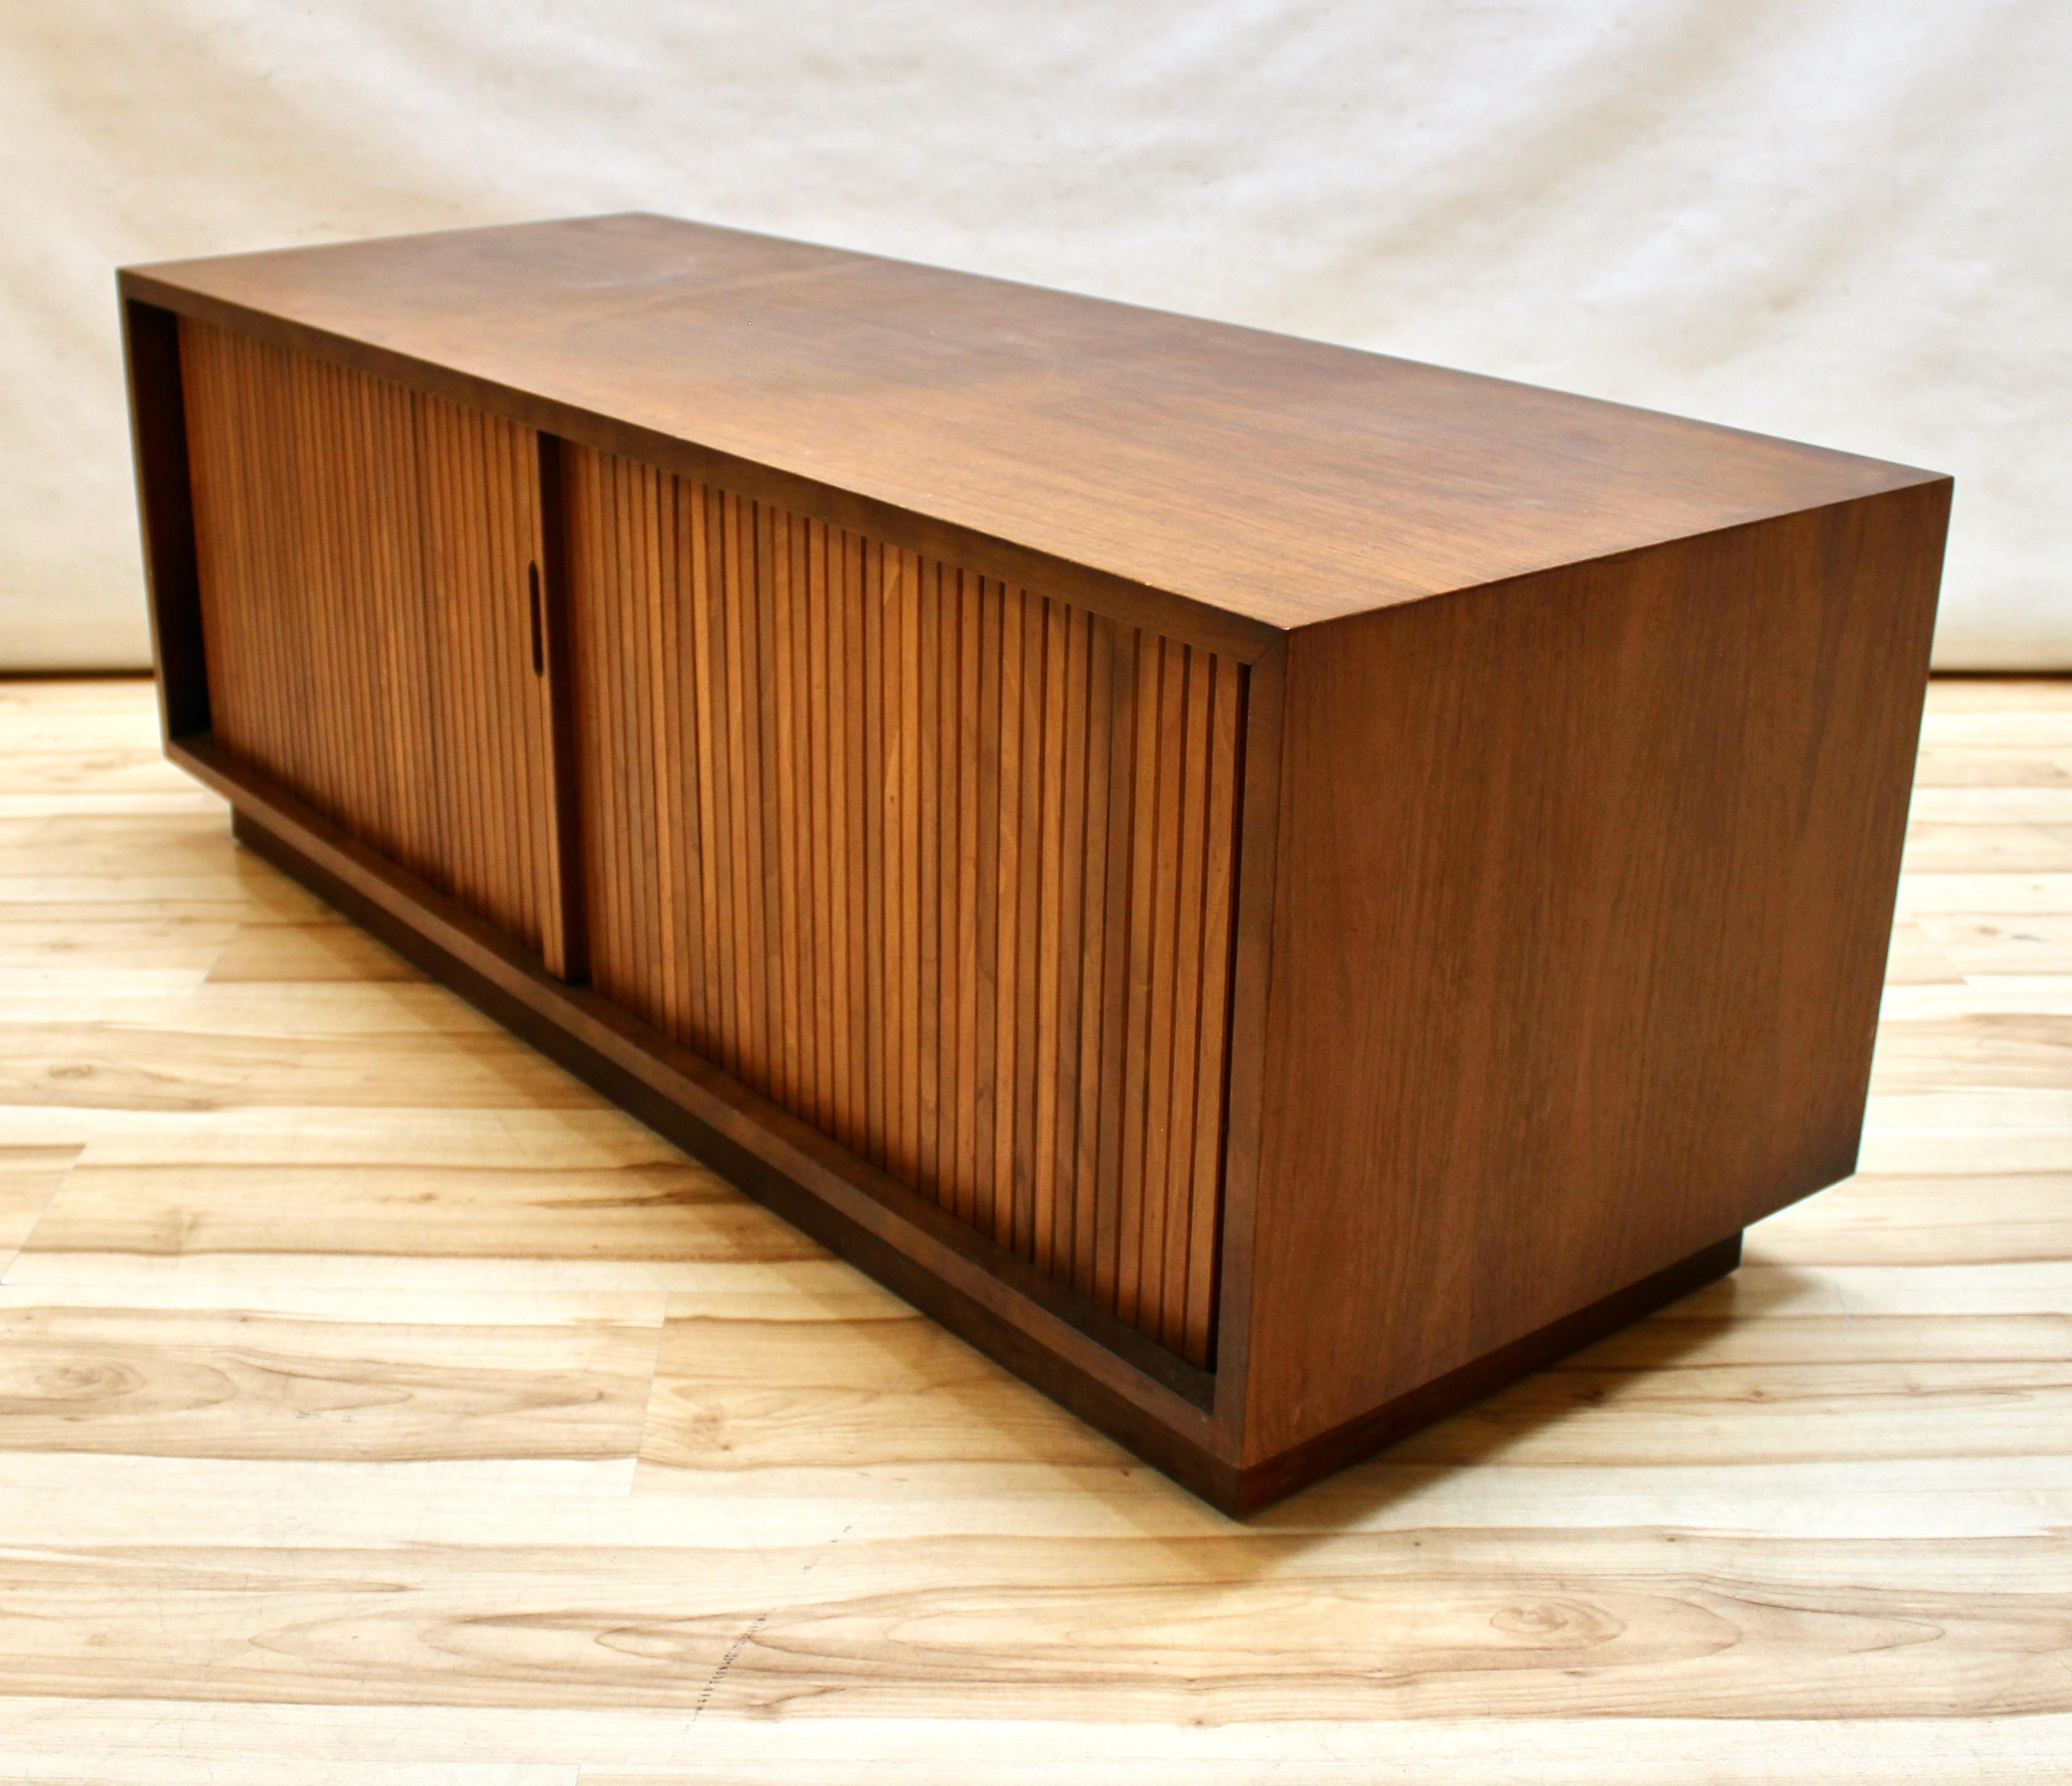 Mid-Century Modern Barzilay walnut record cabinet with tambour doors. The doors have sculpted pulls, and there are interior dividers for record storage. In excellent condition.

Measures: Width: 48 in / Depth: 18 in / Height: 17.75 in.